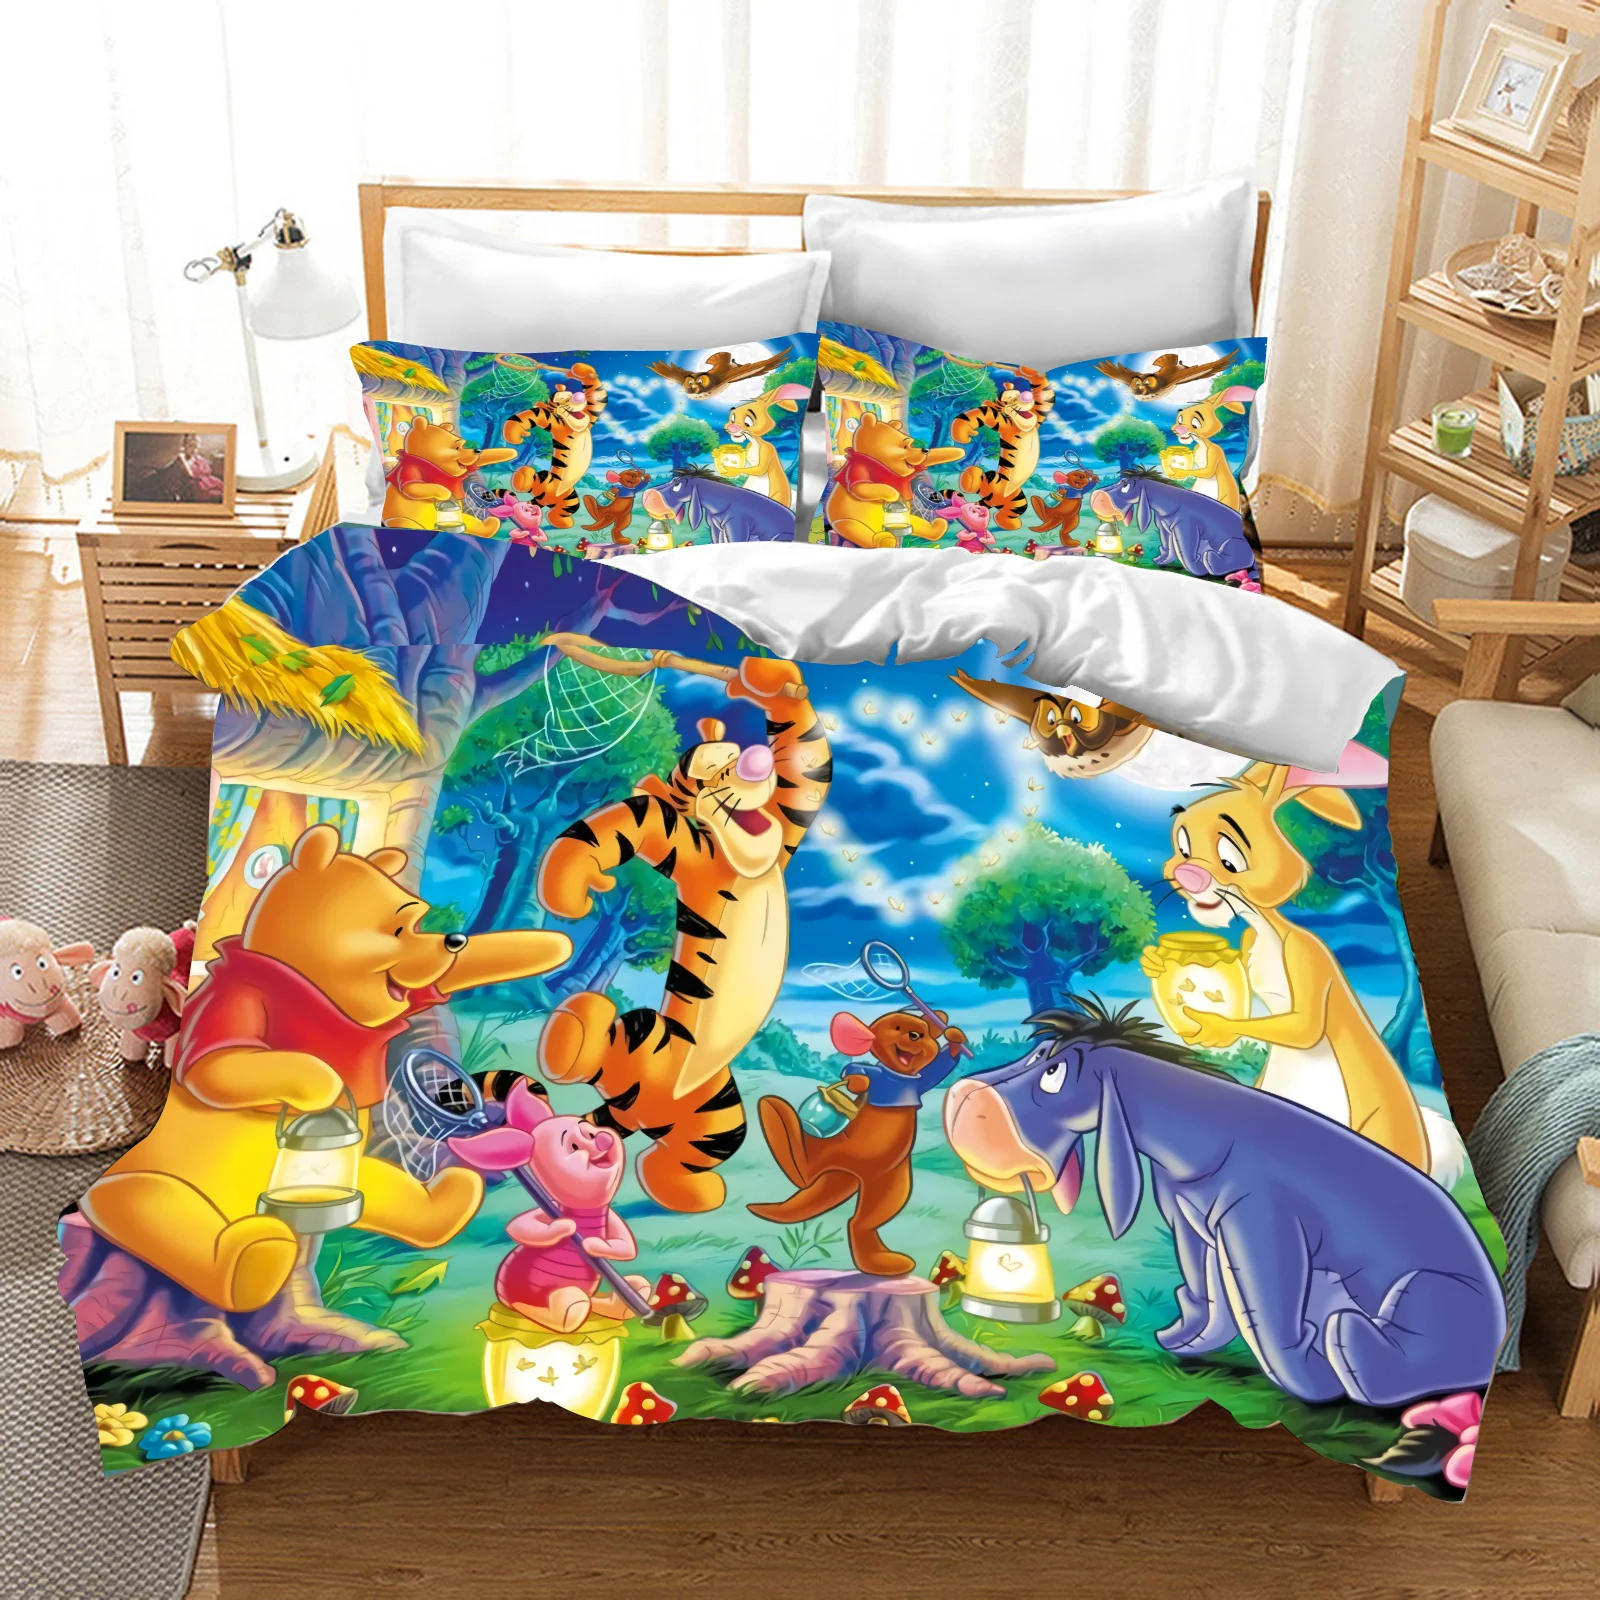 

Winnie The Pooh Cute Cartoon Animation Shiny Duvet Cover Set Adults and Children Bedding Bedroom Special Quilt Cover 3D Printing